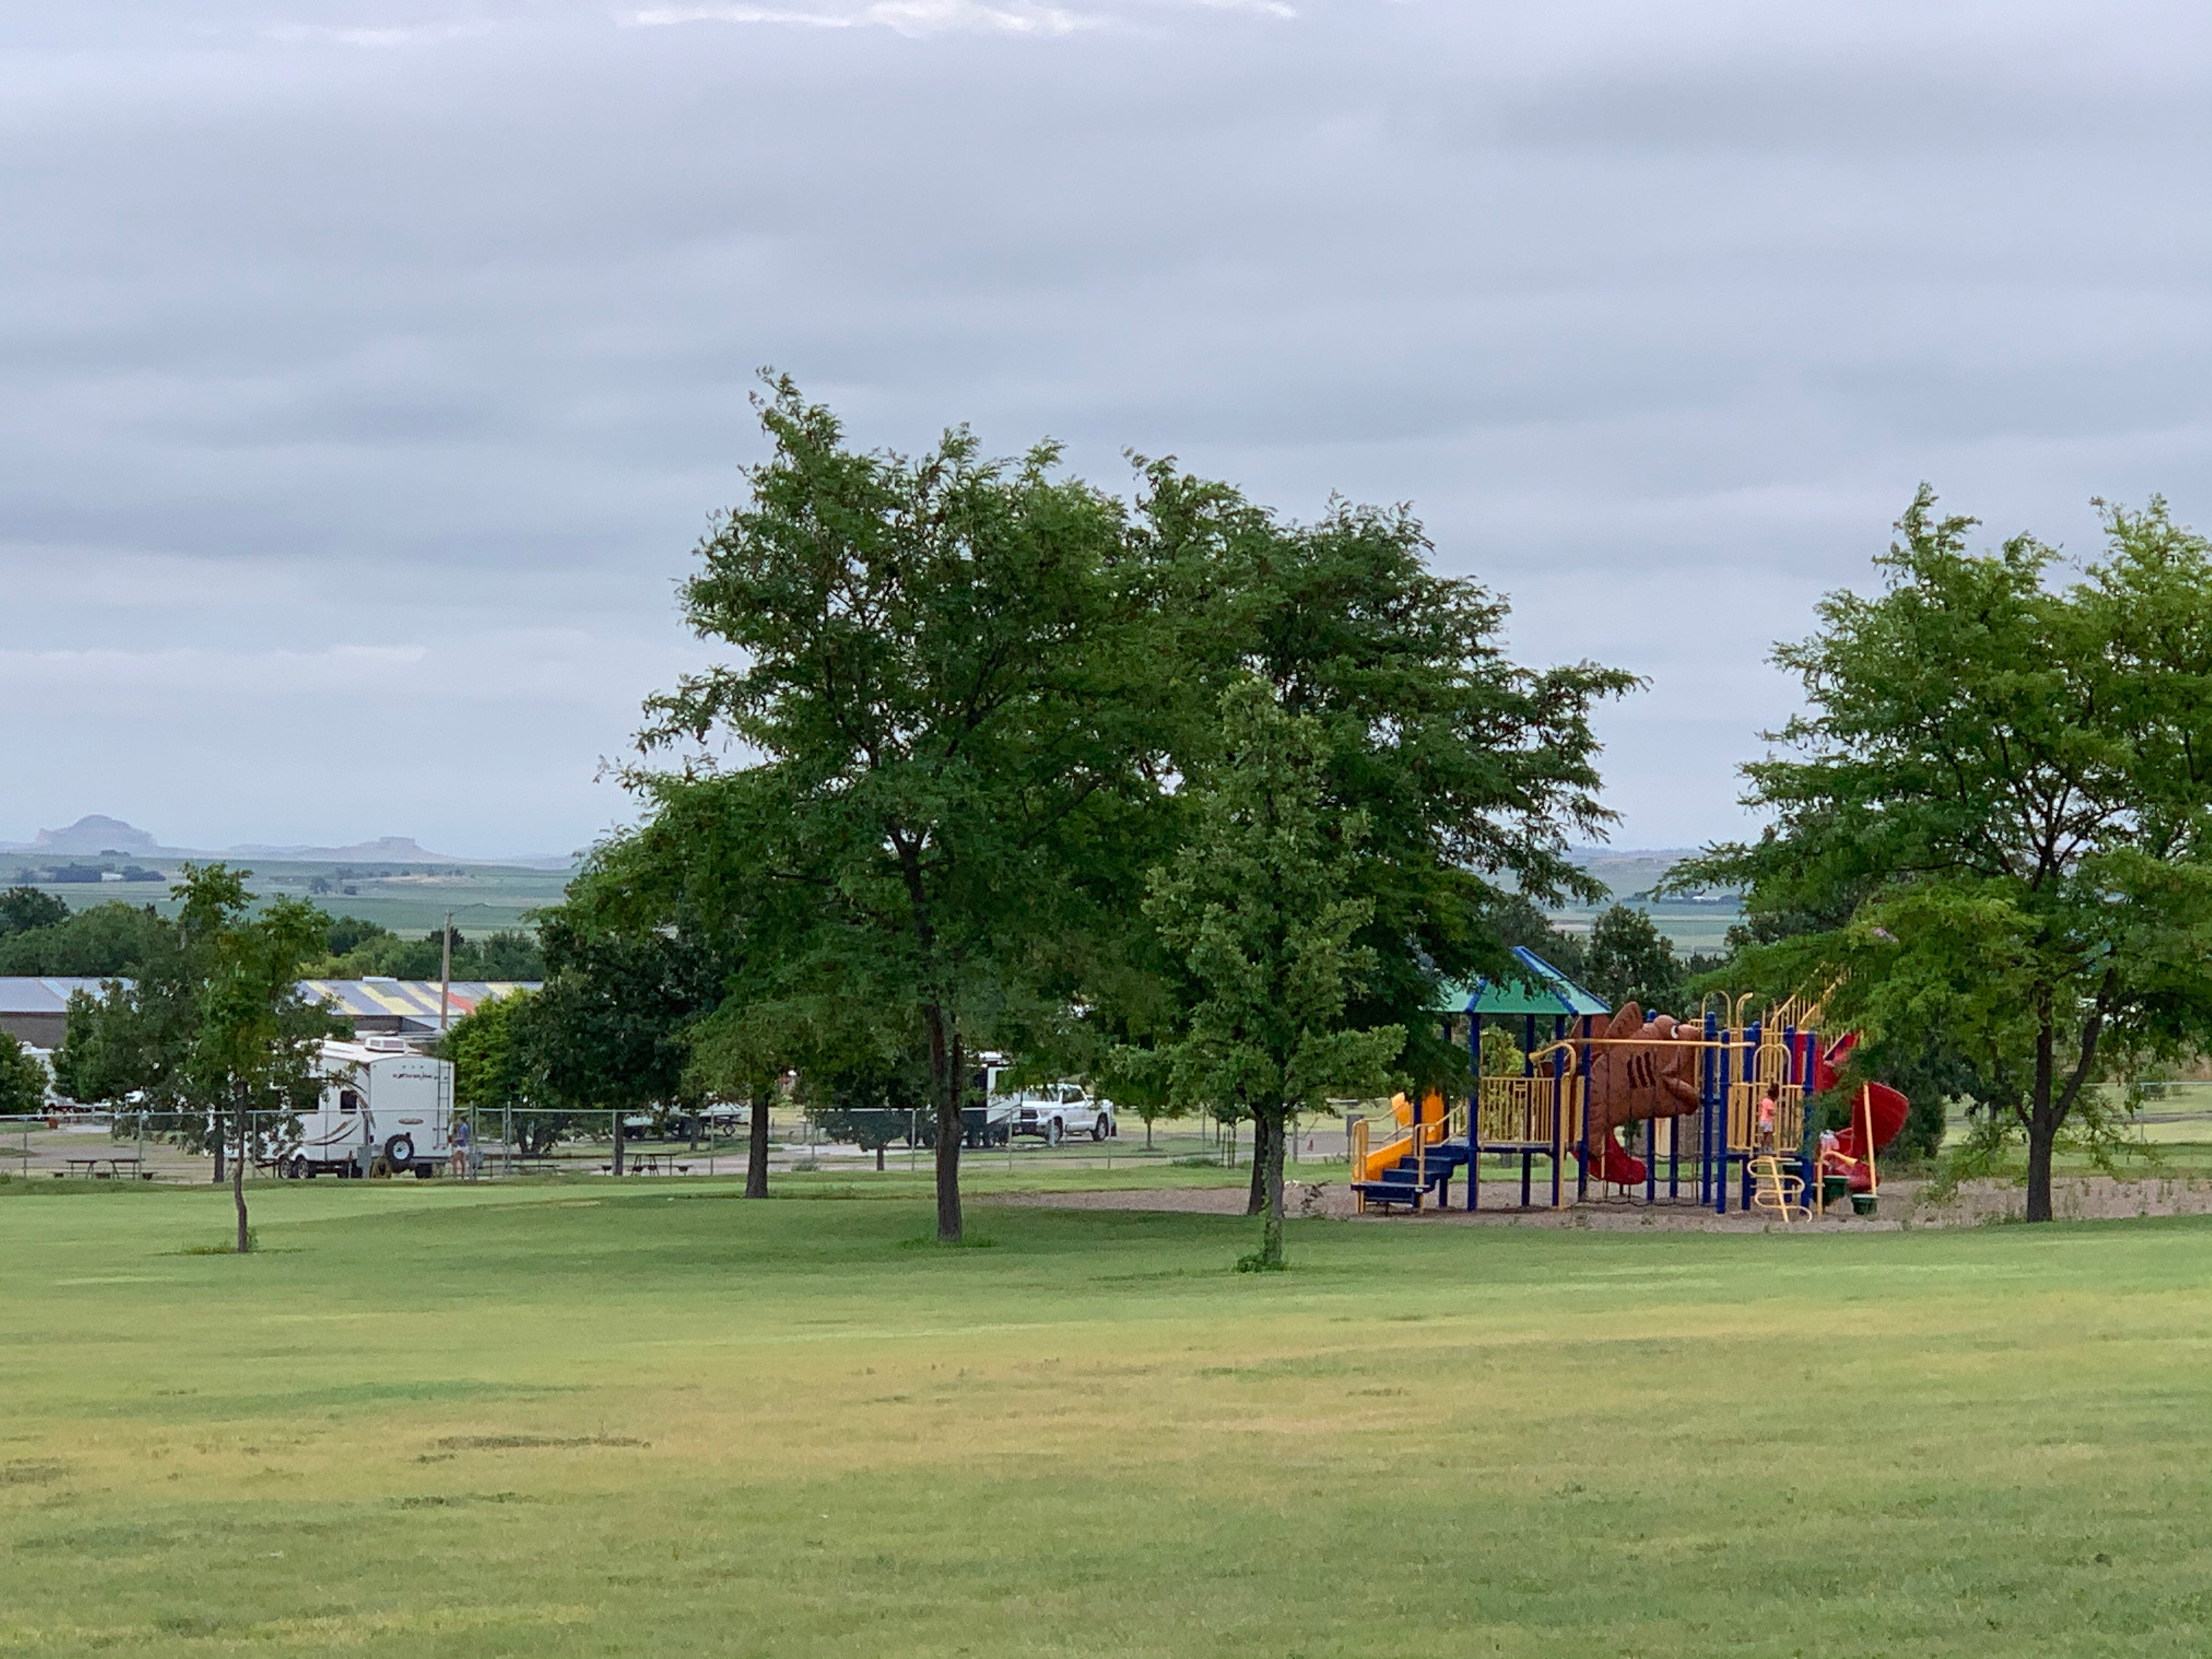 Playground structure in a shared green space between the RV Park and the Five Rocks Amphitheater.